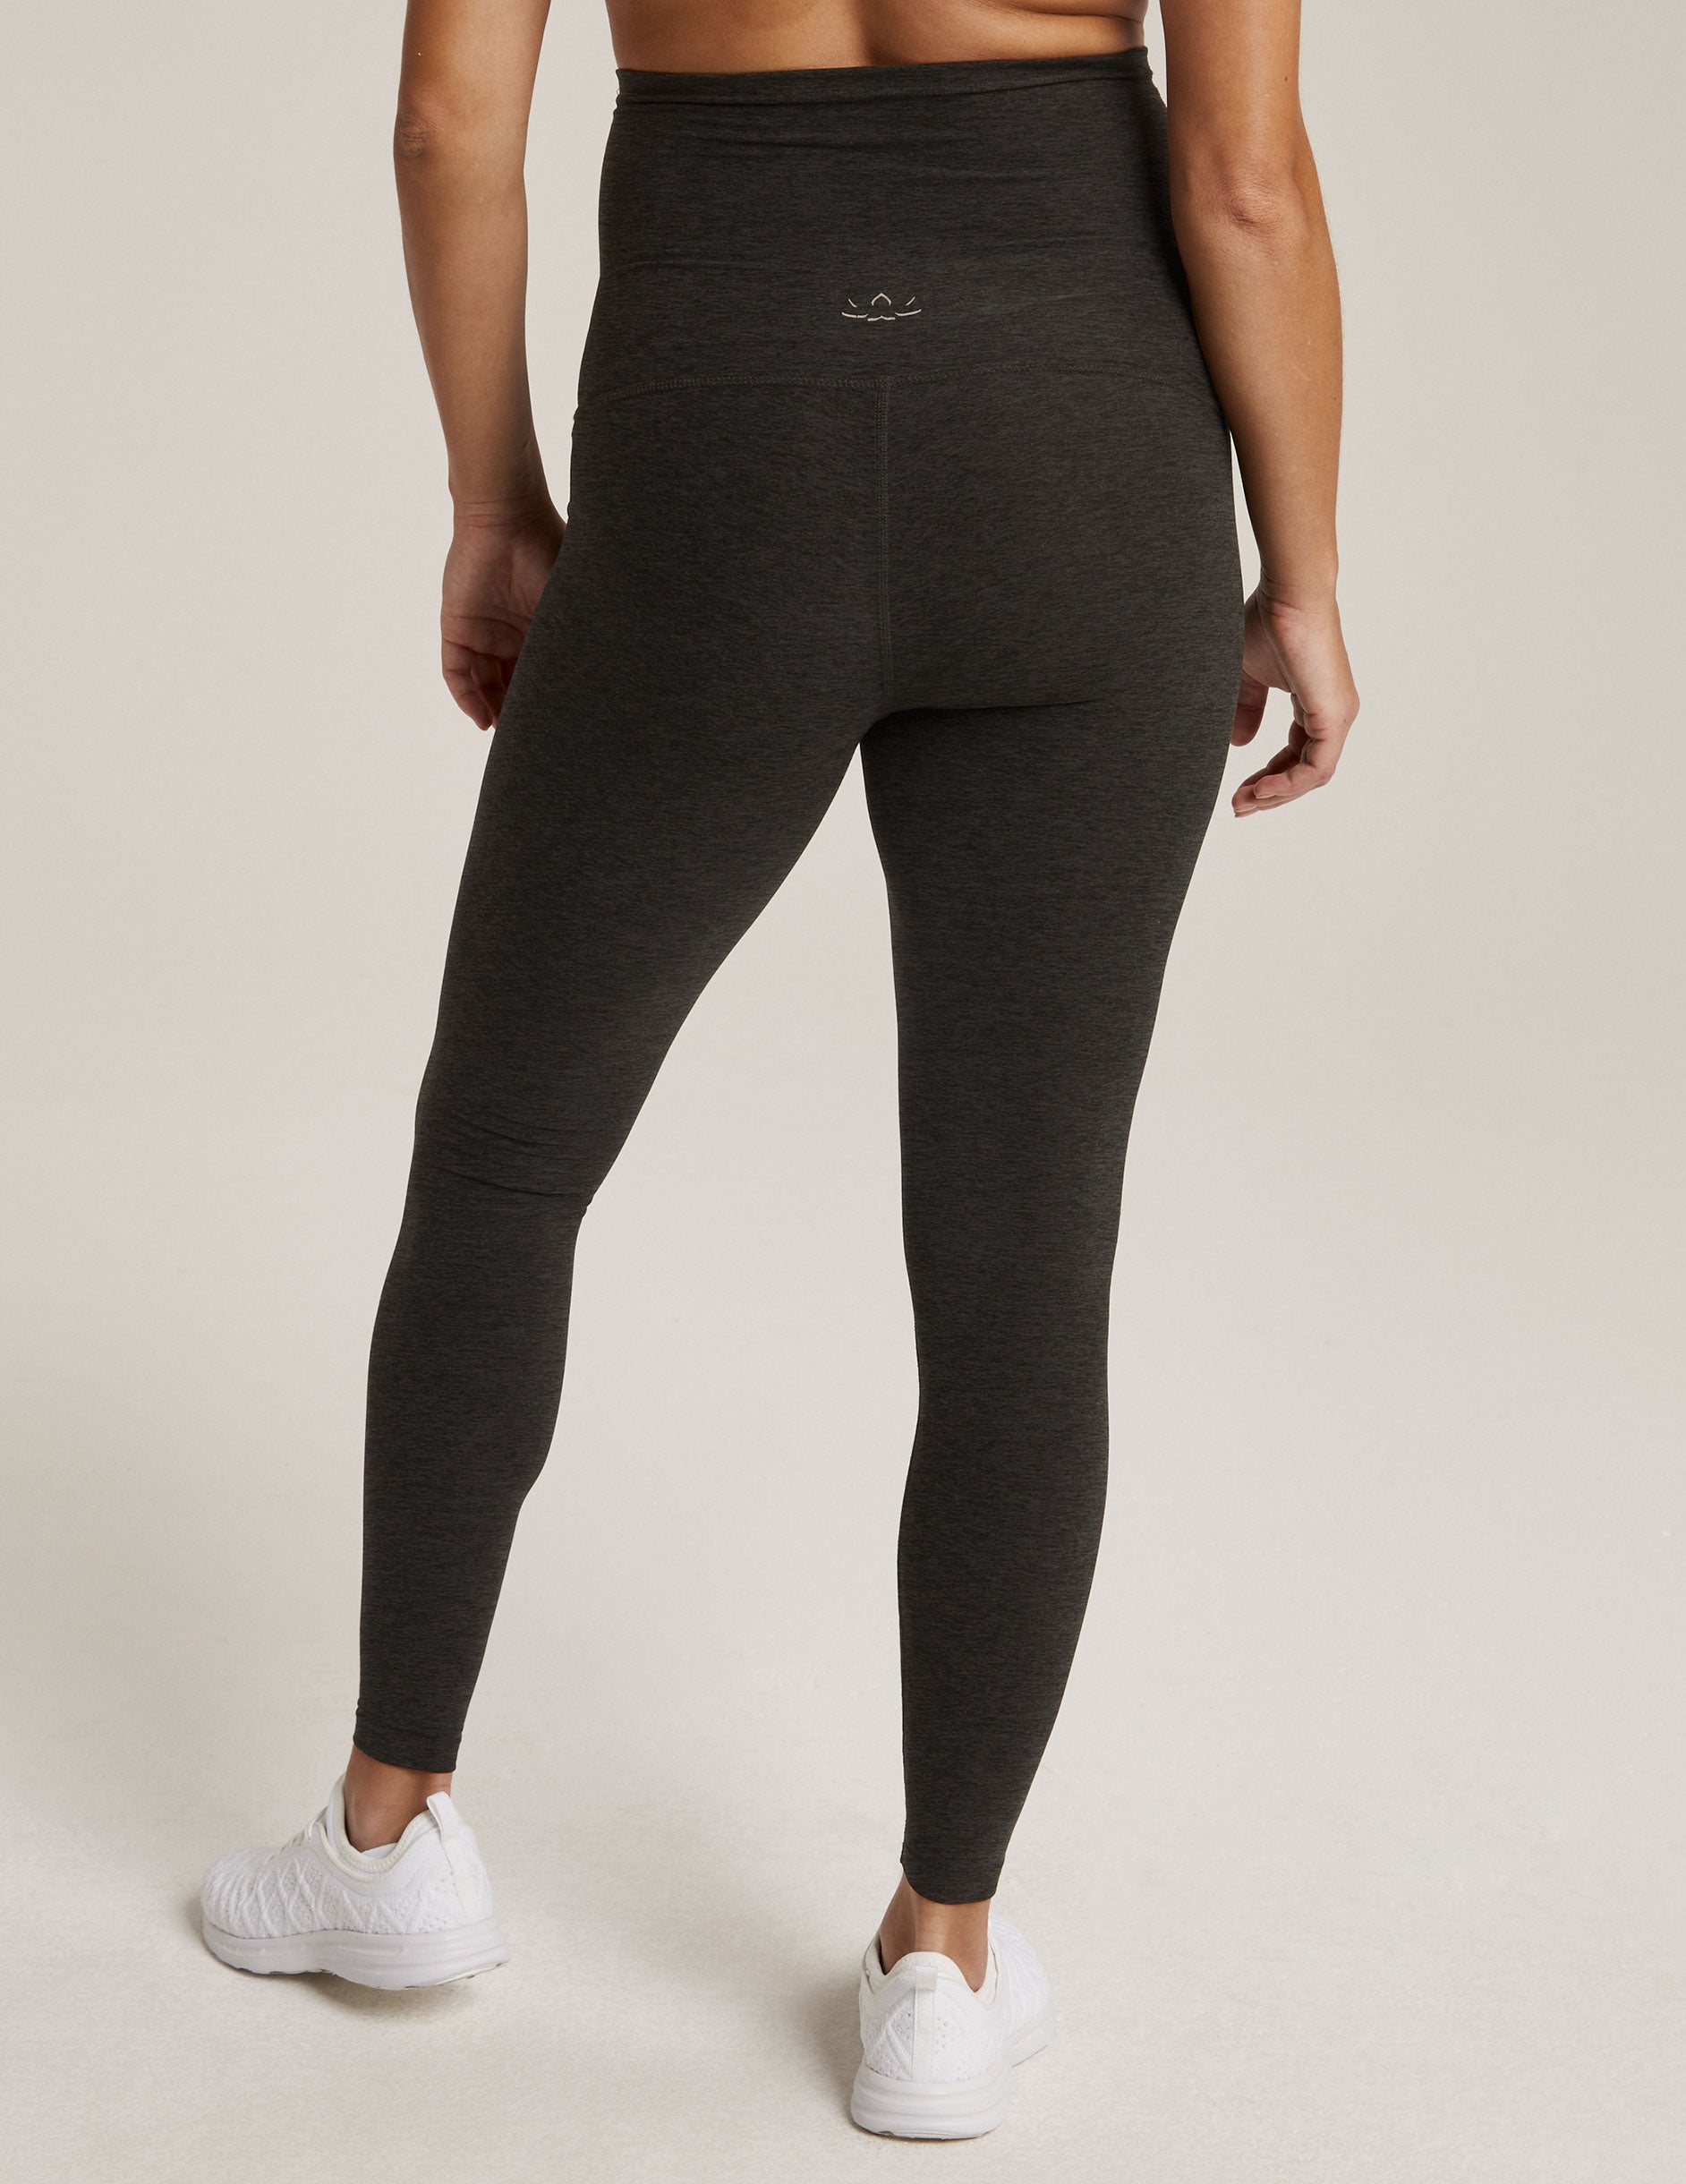 Love Graphic Waistband Leggings  Shop Old Active/Lounge Wear at